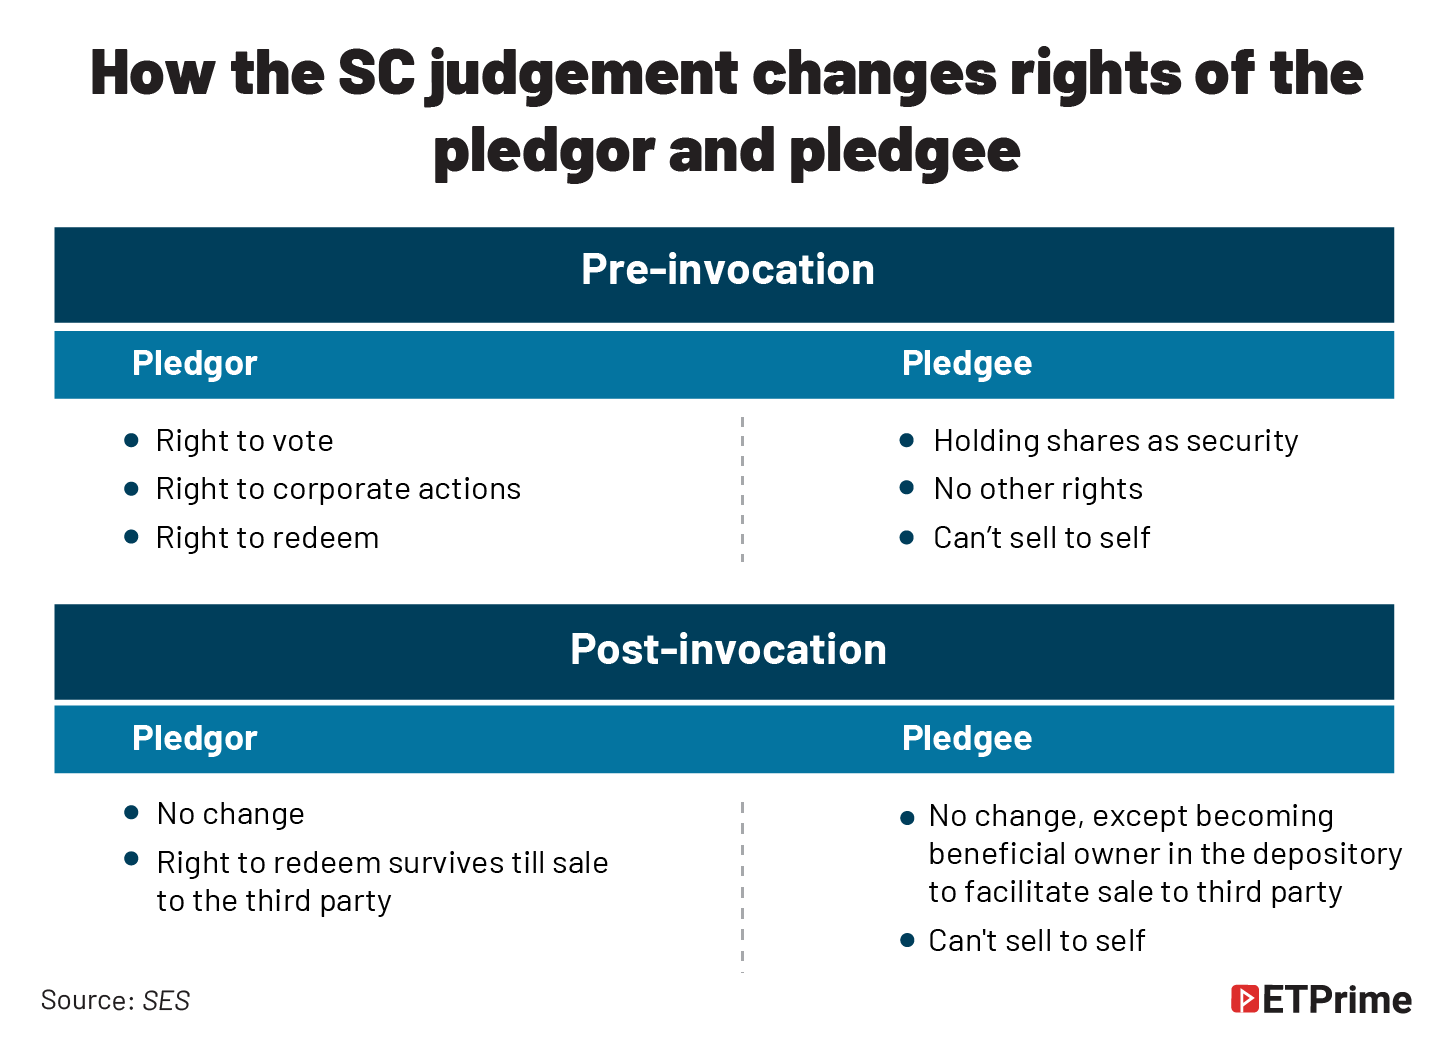 How the SC judgement changes rights of the pledgor and pledgee @2x